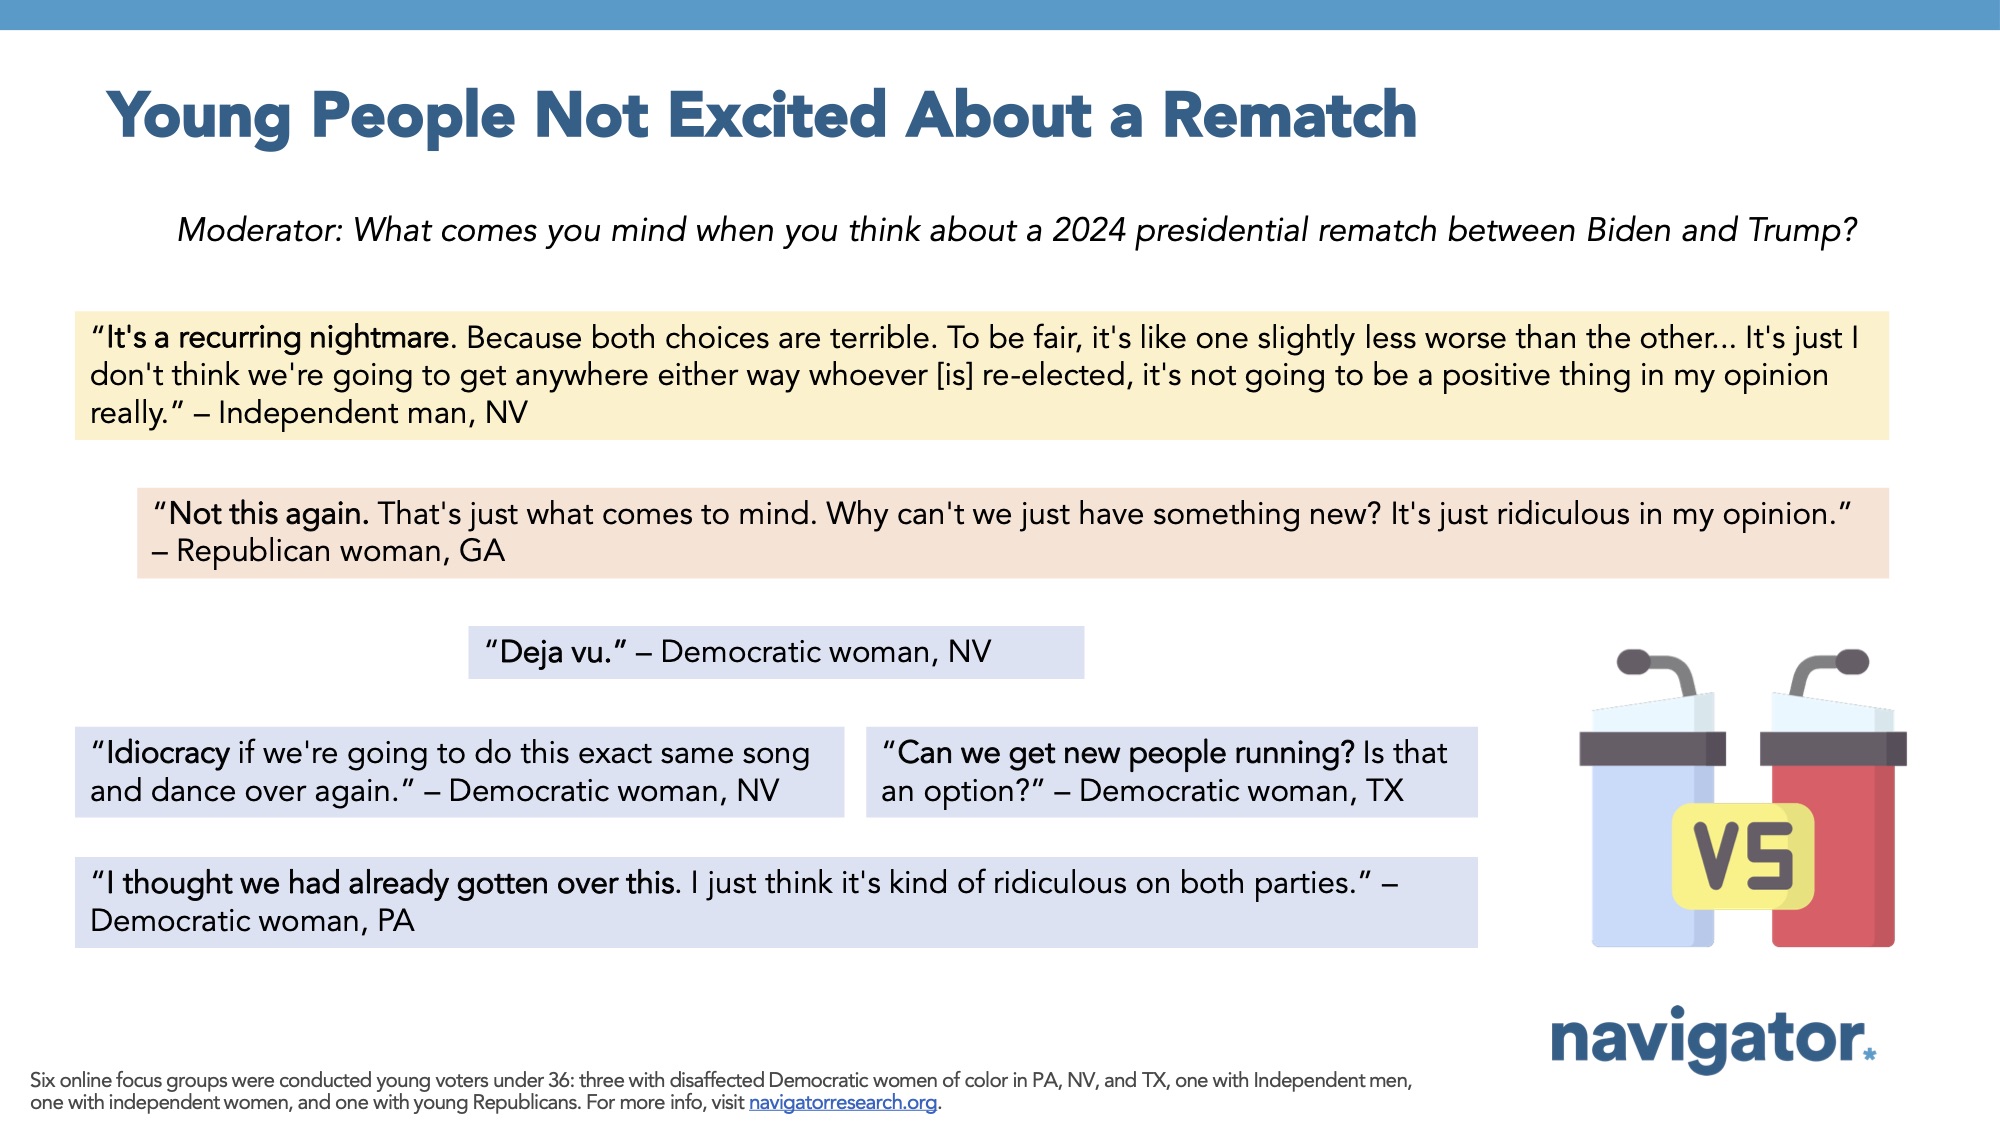 Focus group report slide titled: Young People Not Excited About a Rematch